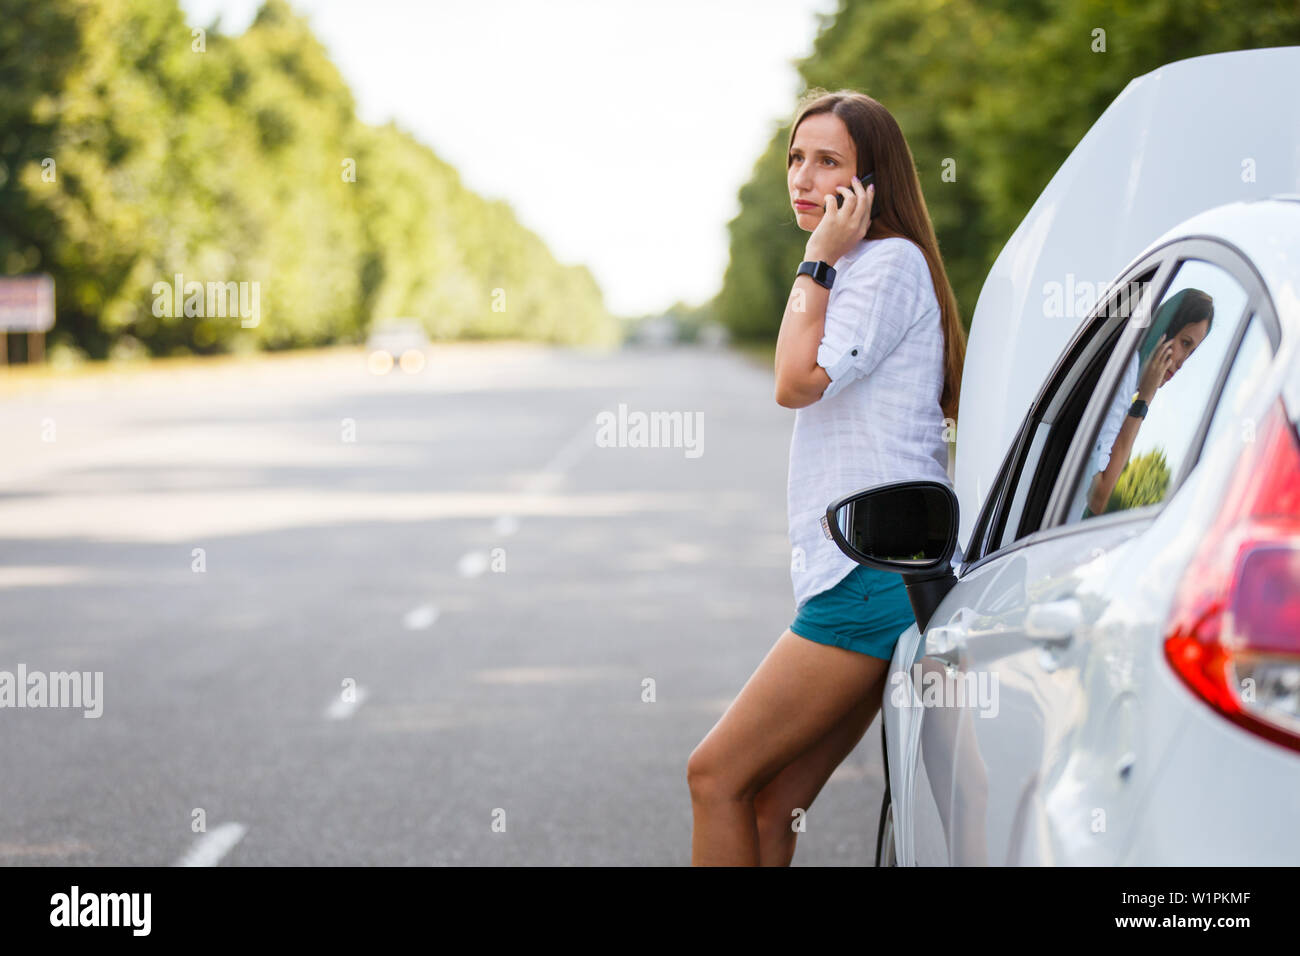 Young woman in trouble calling for help at the broken car Stock Photo